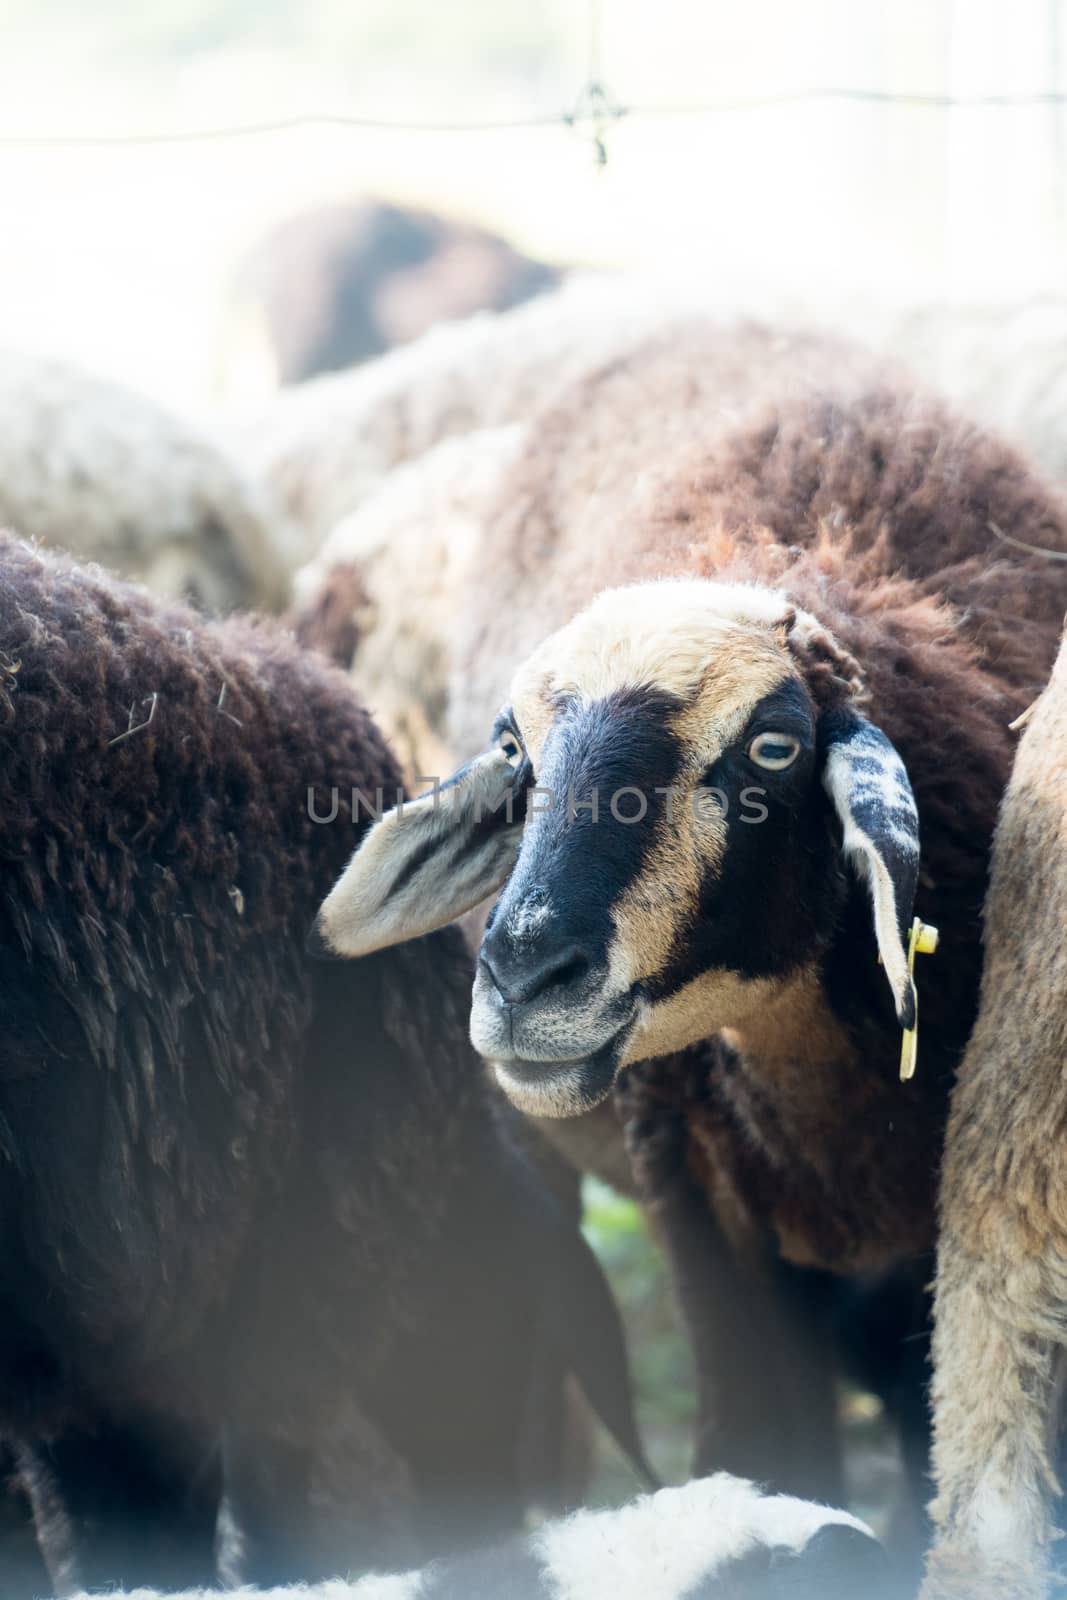 flock brown sheep in farm with tag on ear